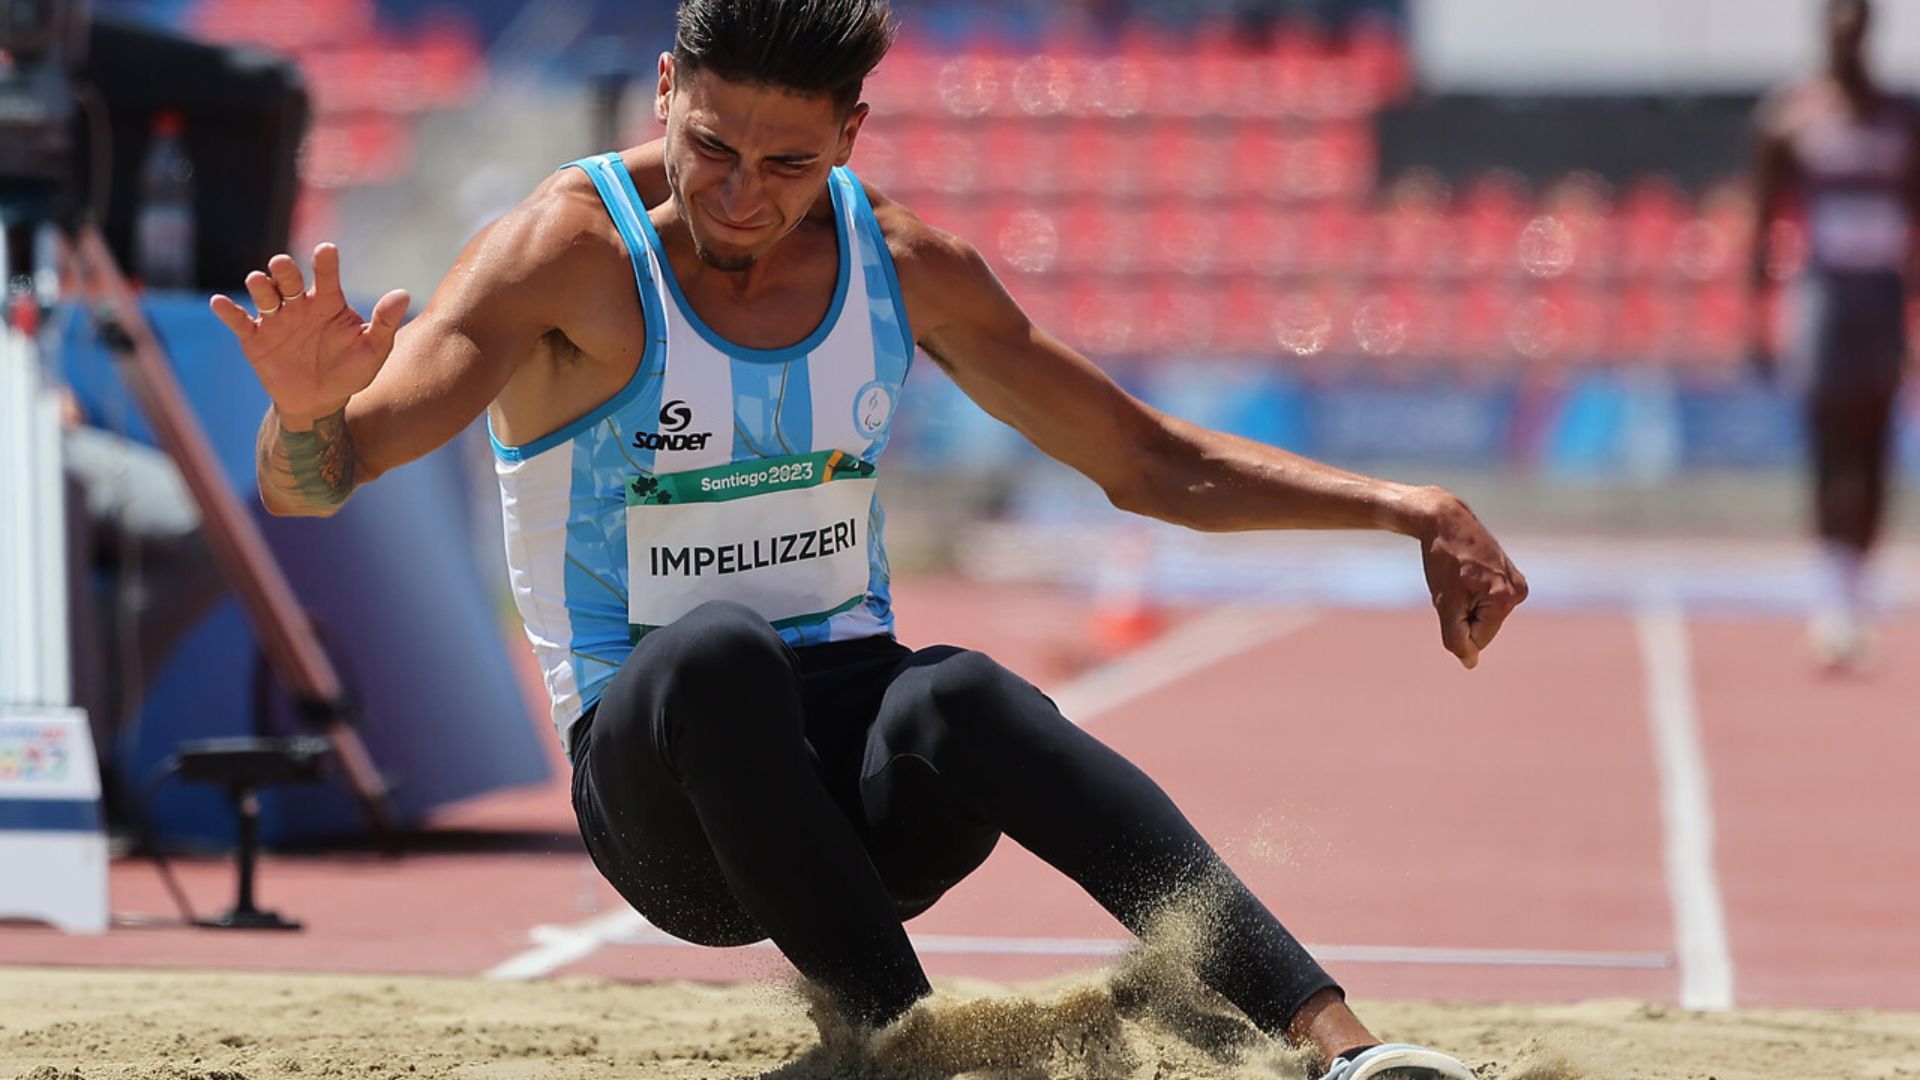 Brian Impellizzeri Sets New Pan American Record in T37-38 Long Jump